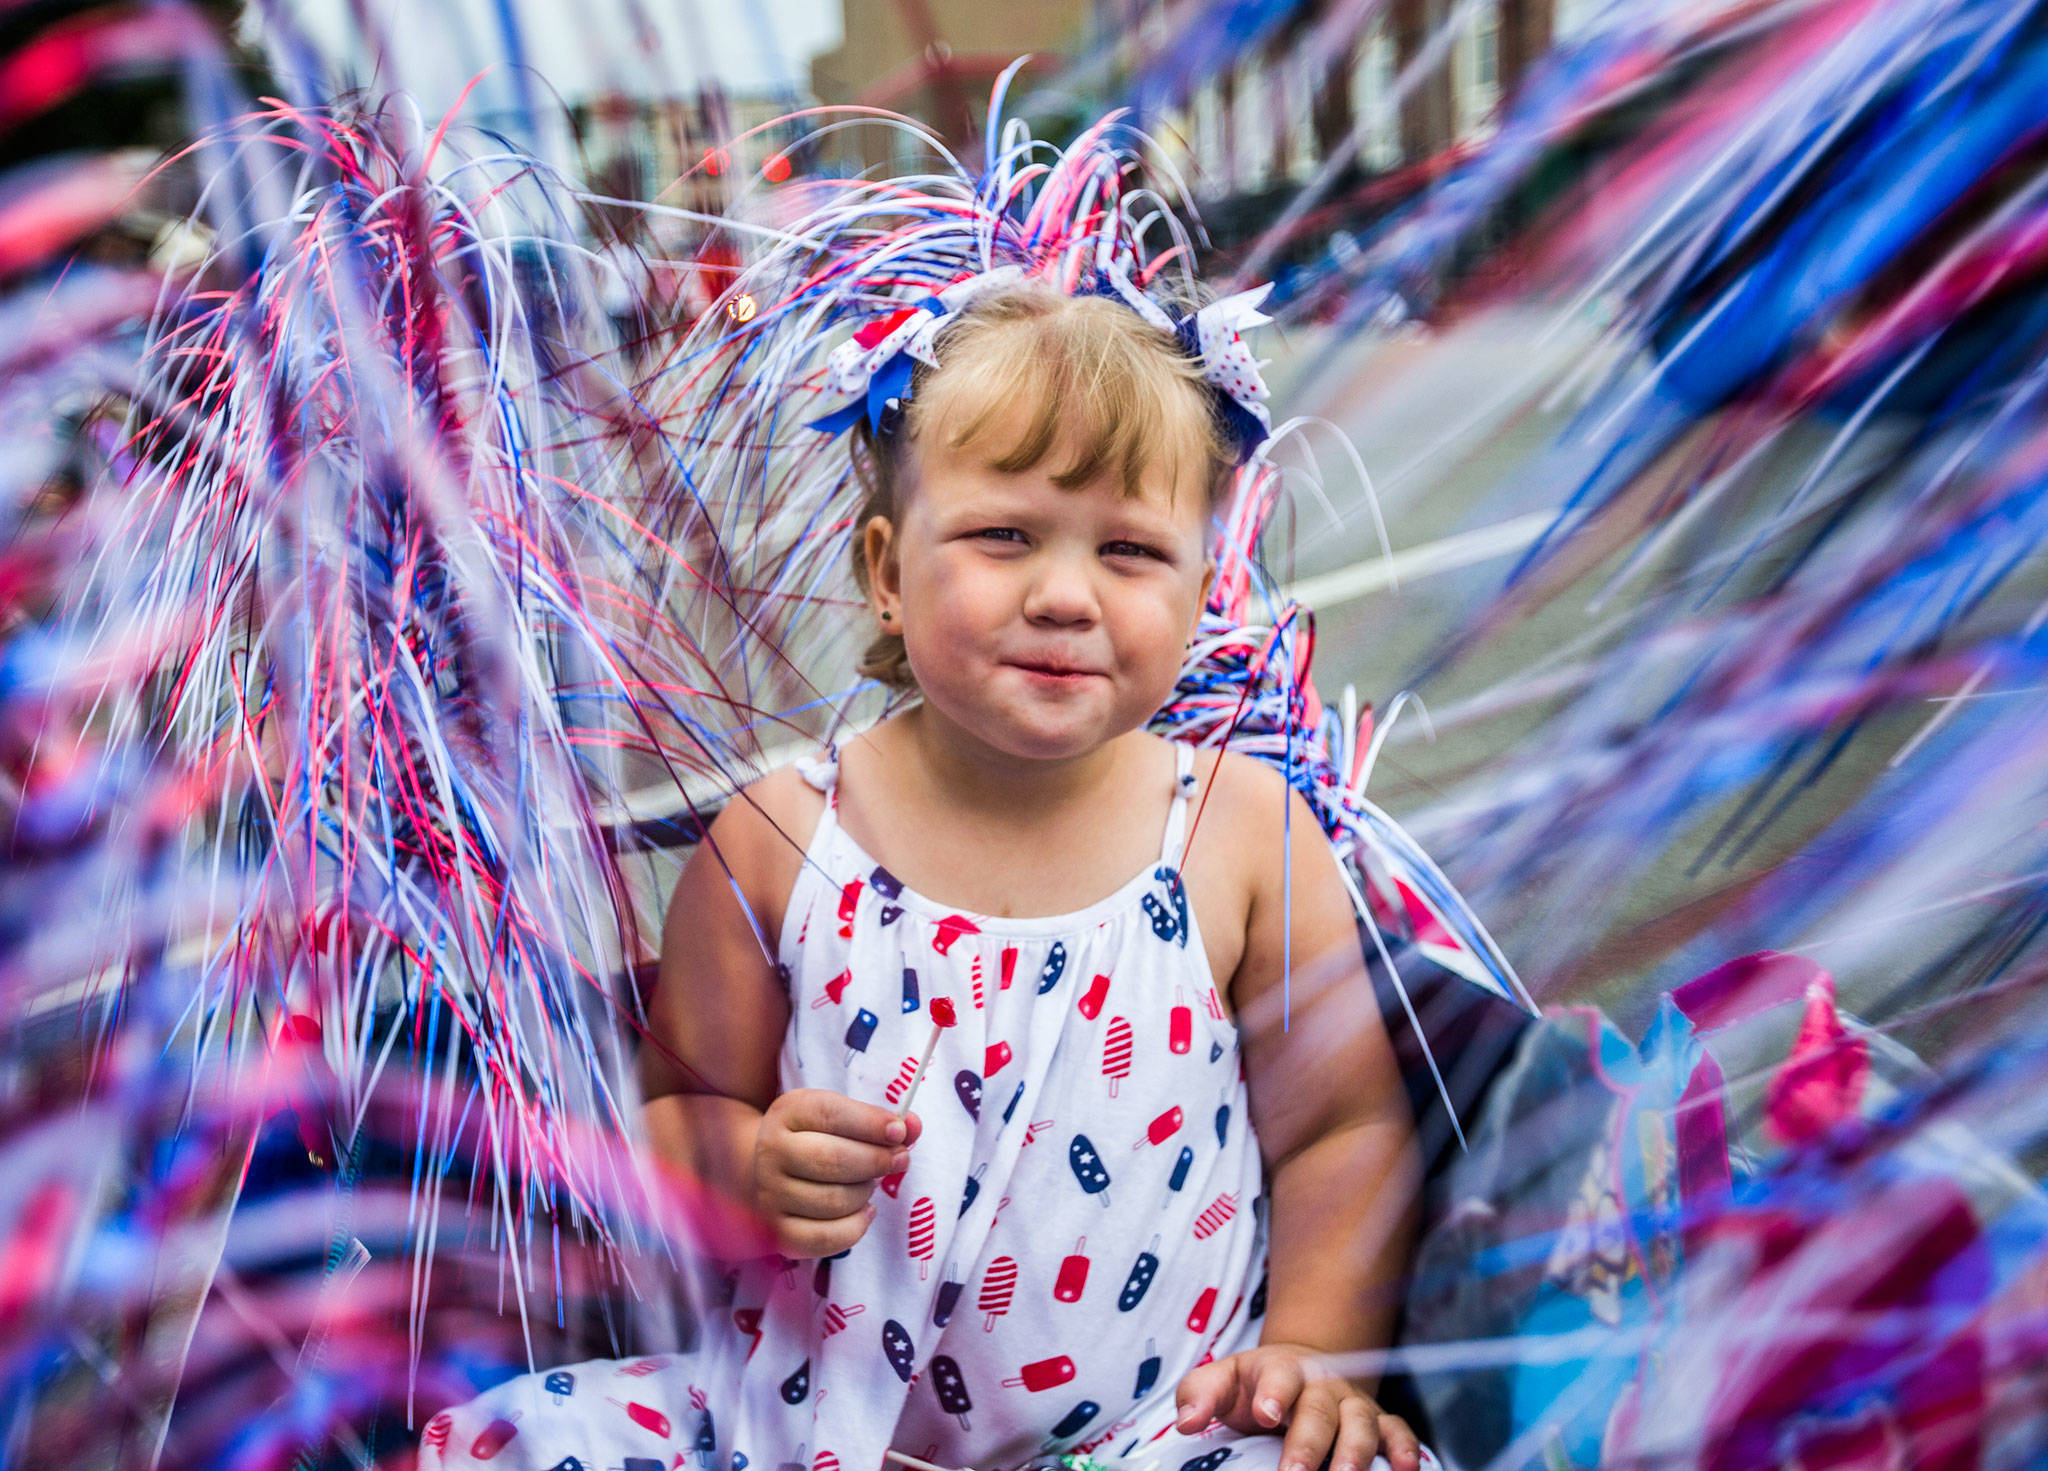 Makena Kombol, 2, rides in a wagon and hands out candy during the Colors of Freedom Fourth of July Parade on Thursday, July 4, 2019 in Everett, Wash. Makena has been participating in this parade since she was 2 months old. (Olivia Vanni / The Herald)